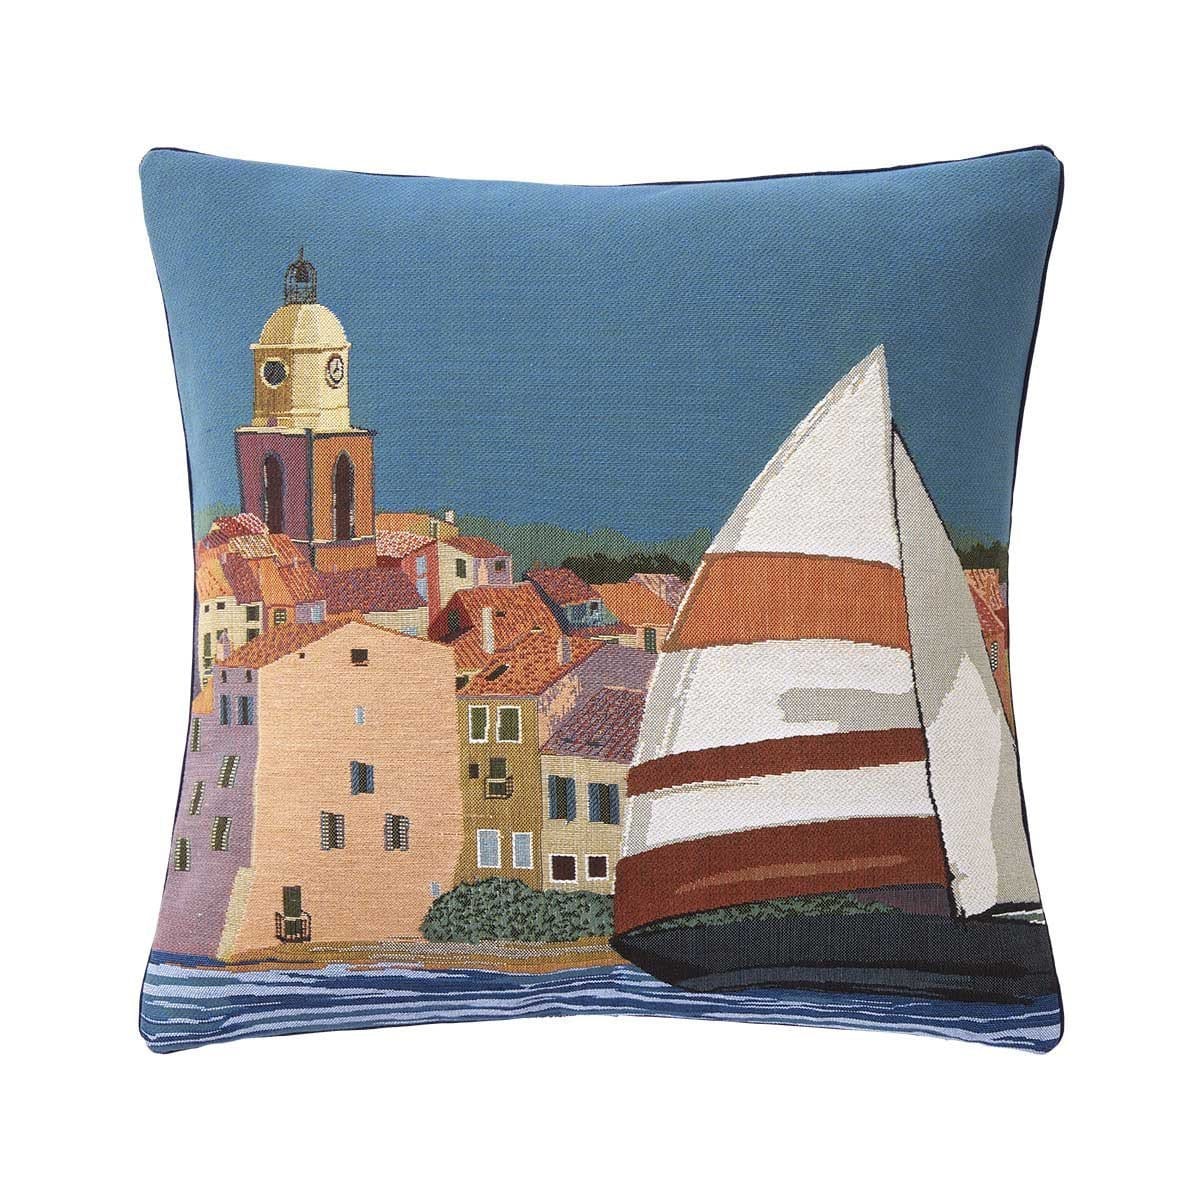 Decorative Pillows Iosis Cigales Decorative Pillow by Yves Delorme AzurV Yves Delorme